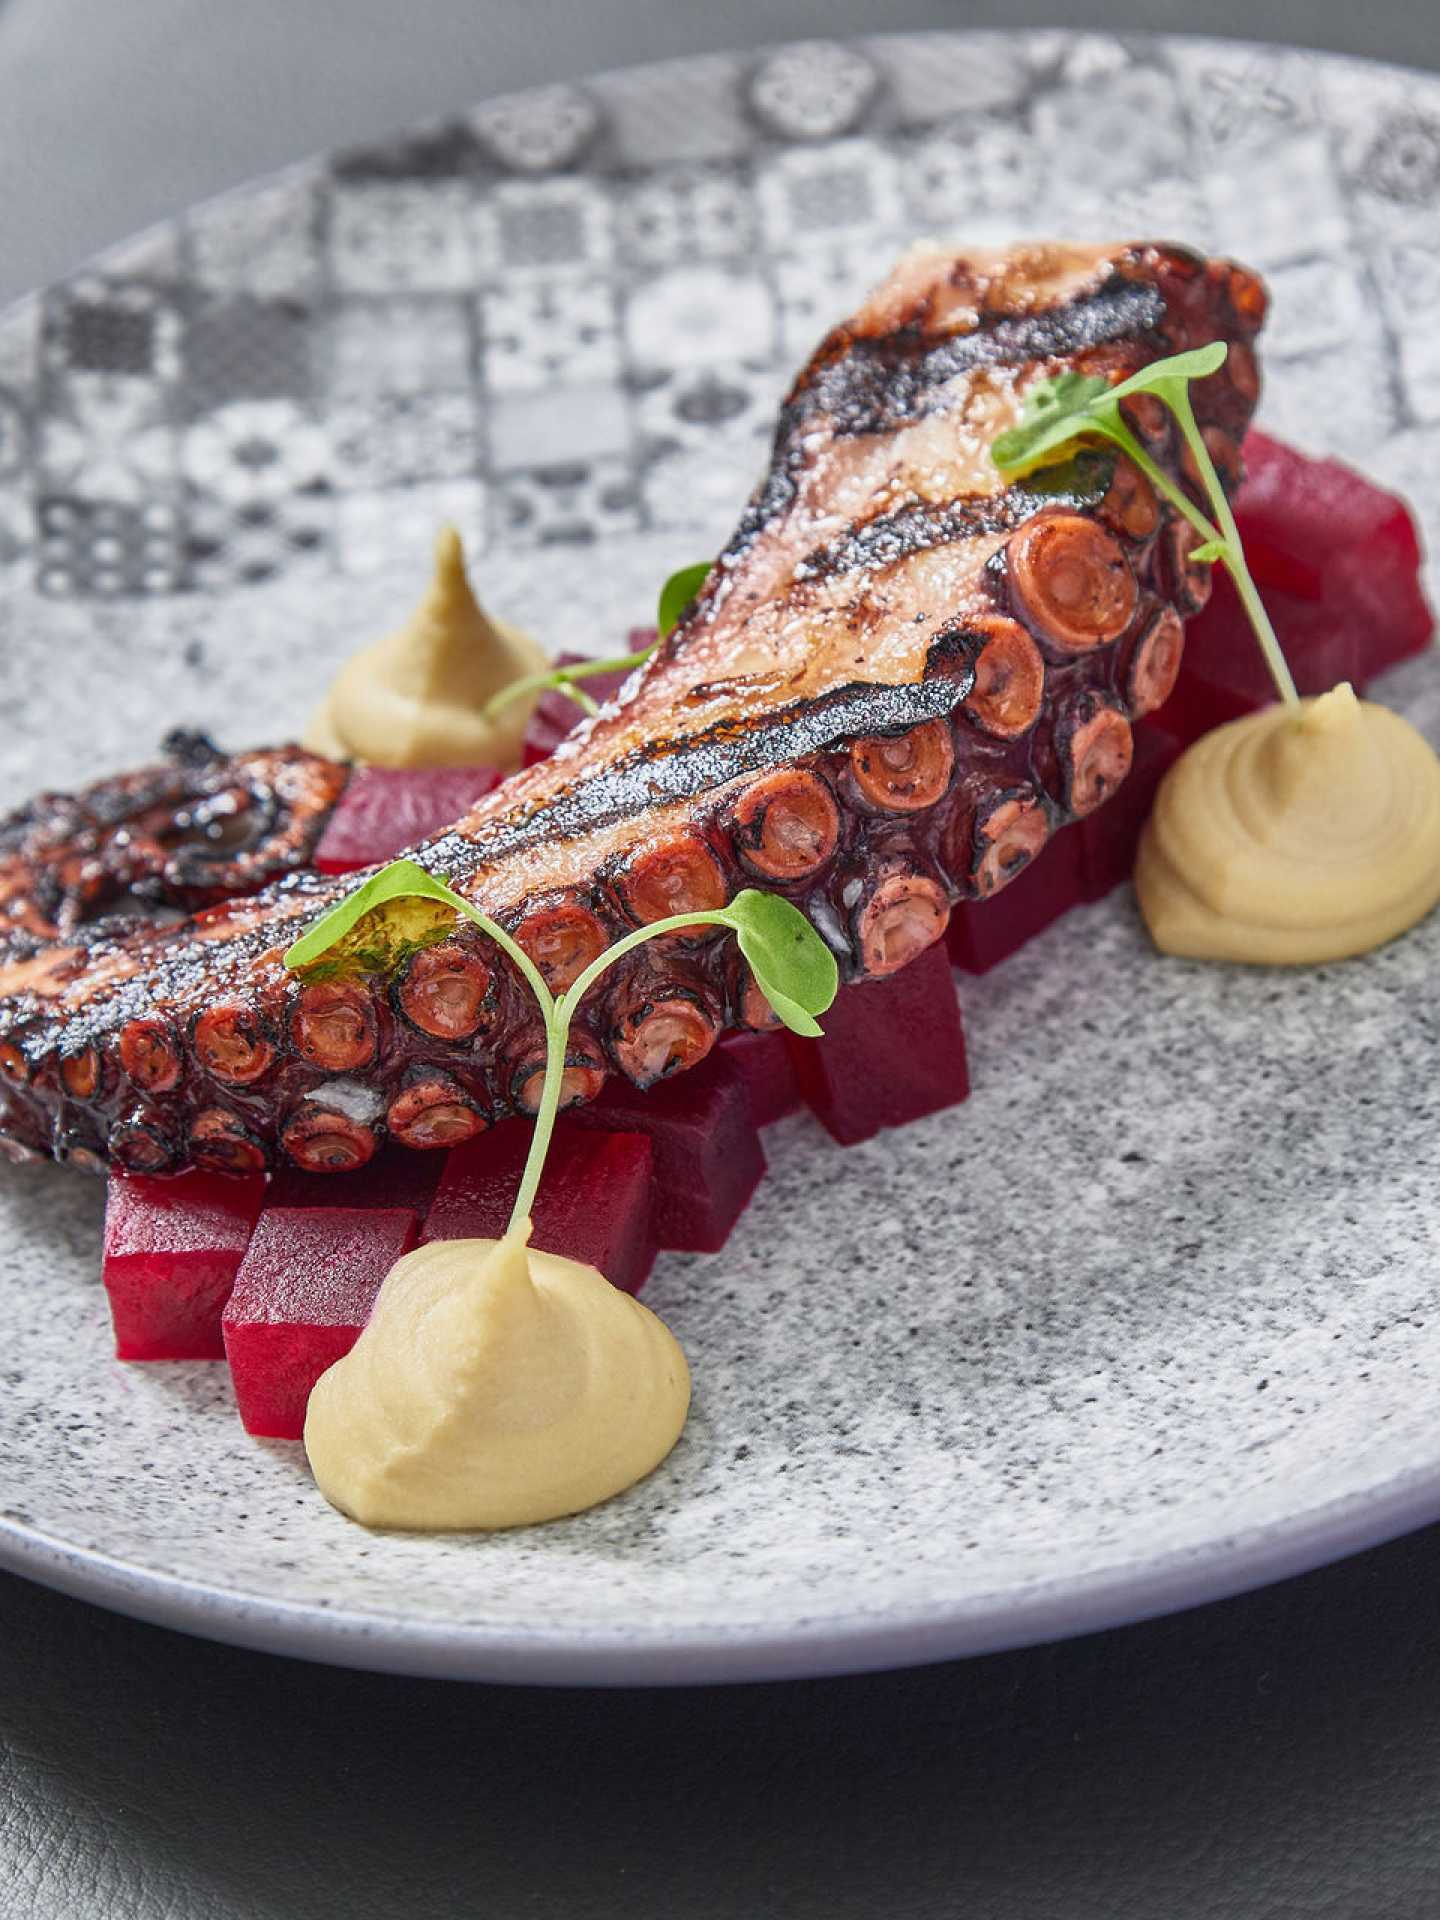 Miss Aida in Toronto | Octopus with hummus and beets